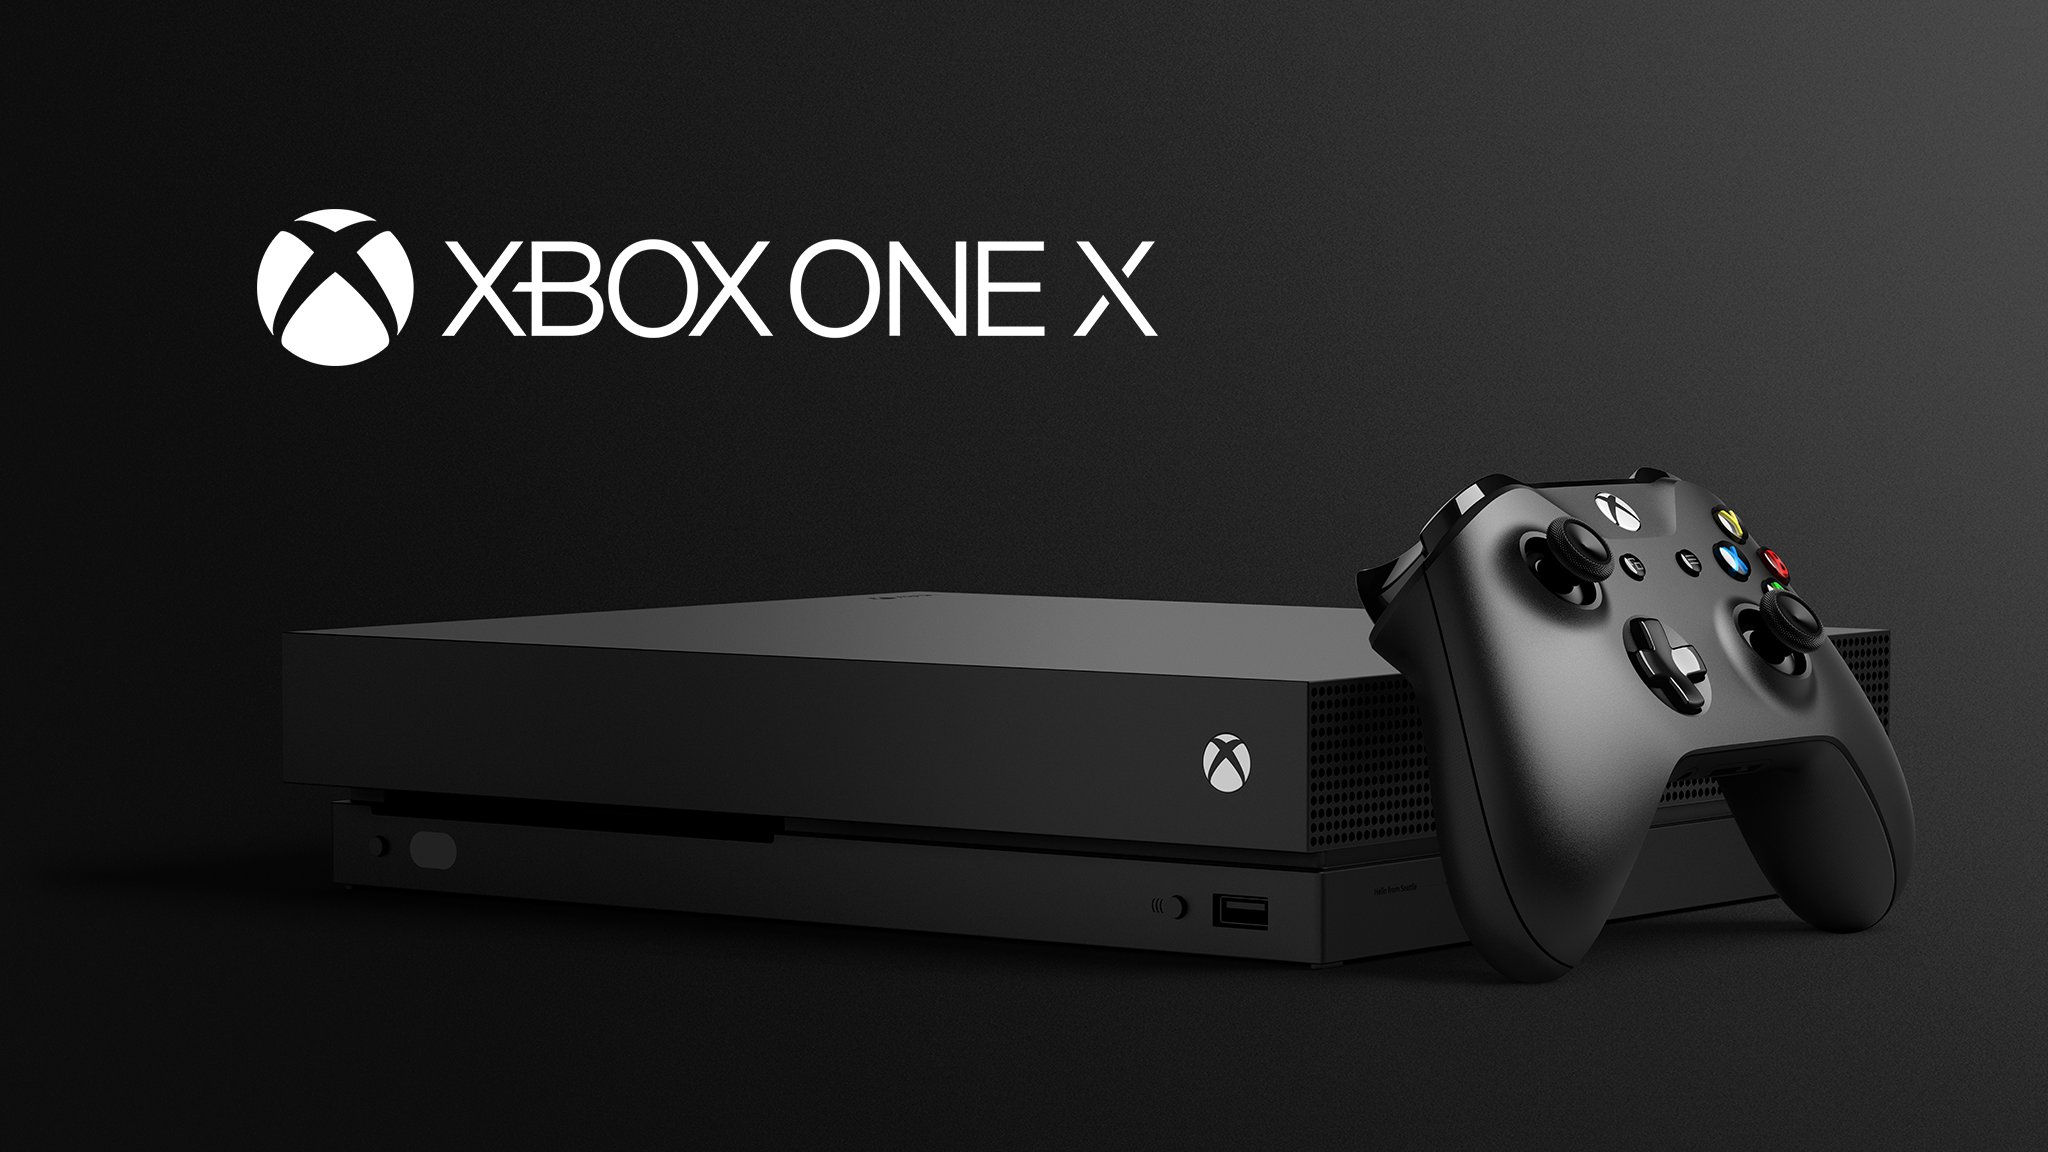 All you need to know about the Xbox One X